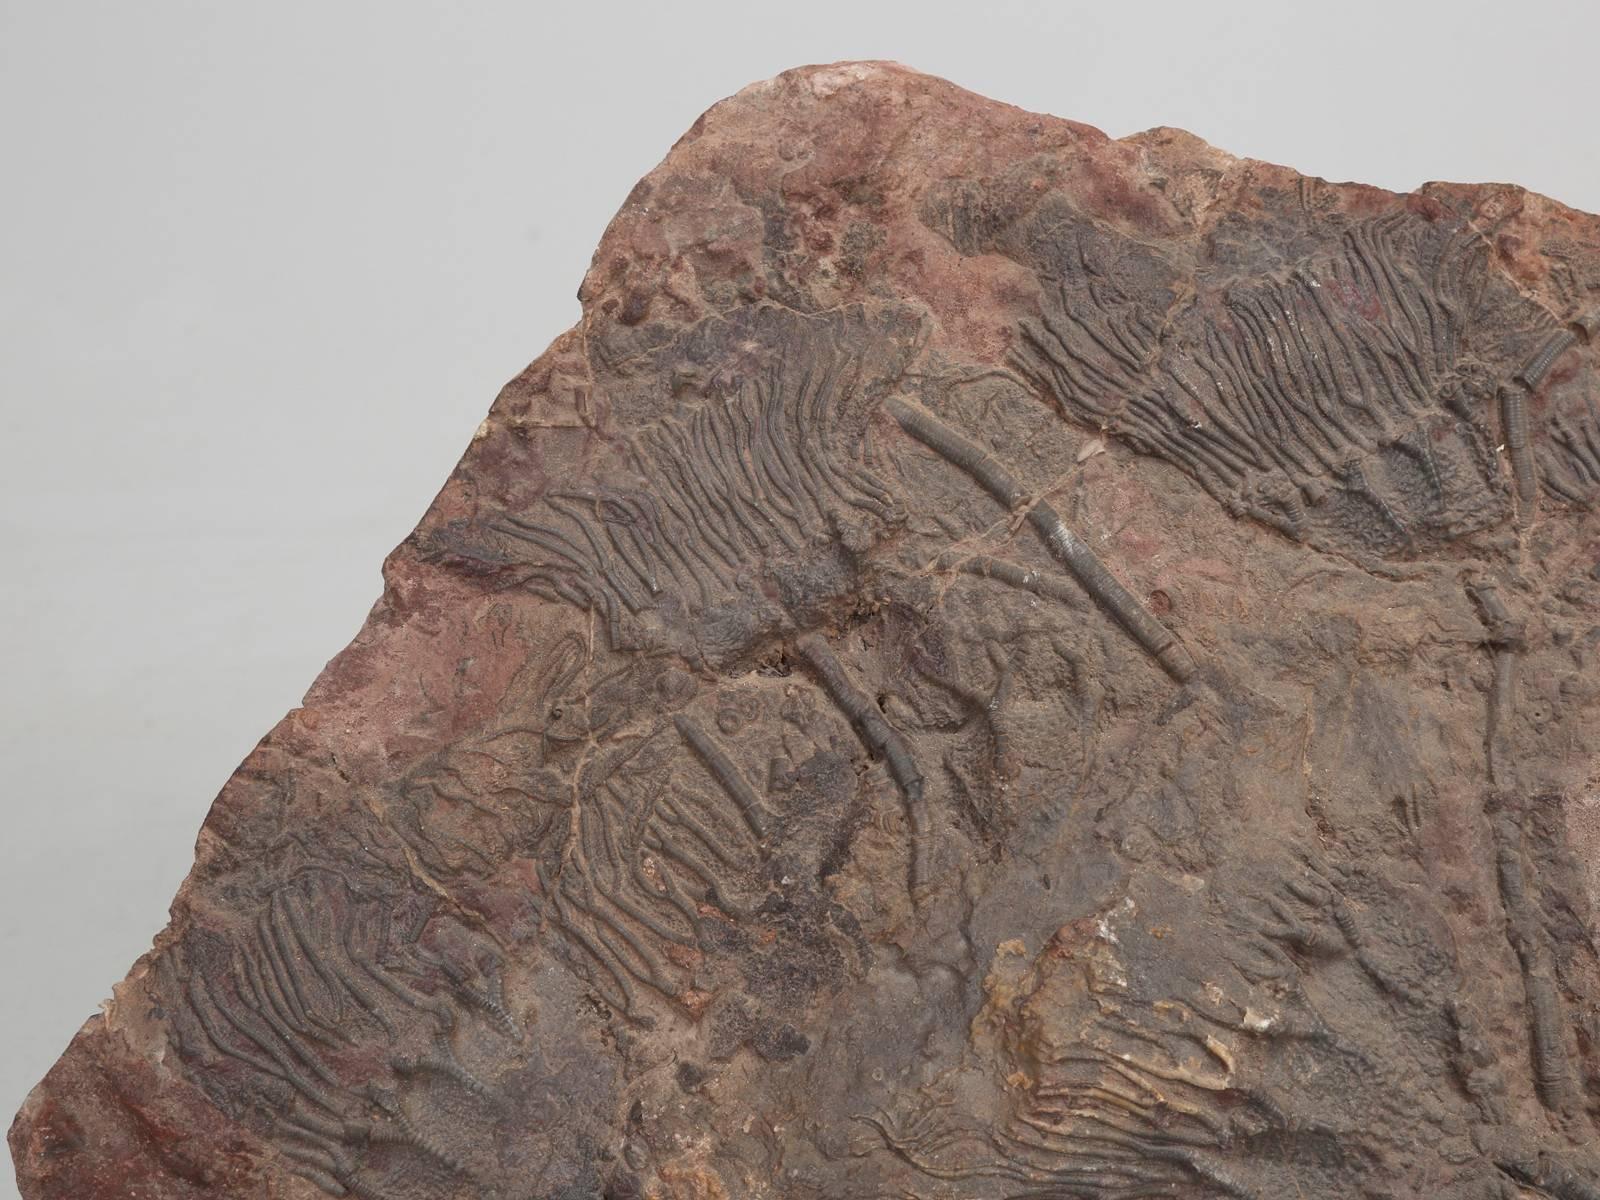 Moroccan Fossil Crinoid, 350 Million Years Old